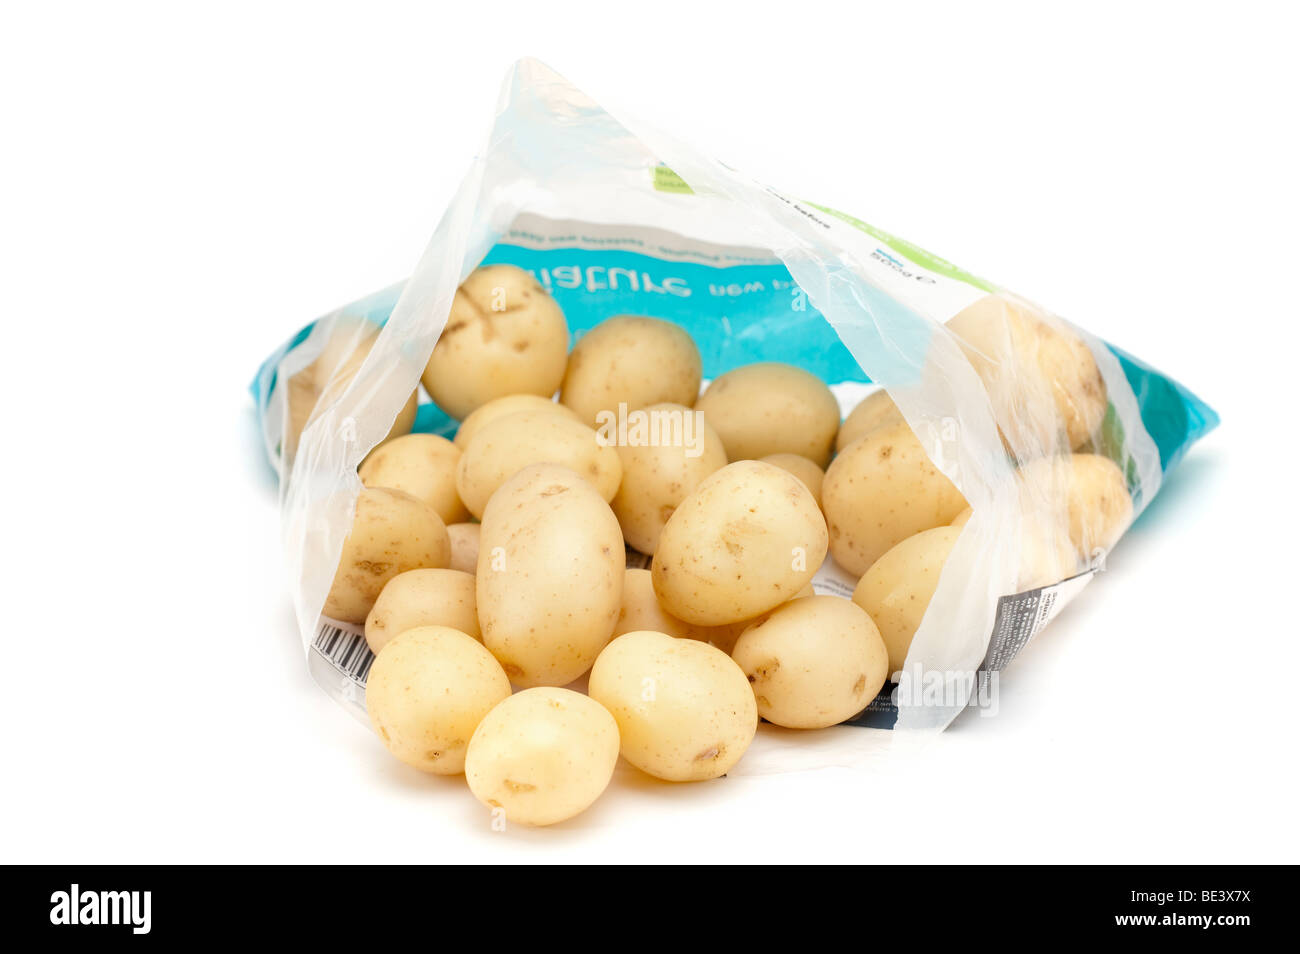 Download Plastic Bag Containing New Potatoes Stock Photo Alamy Yellowimages Mockups